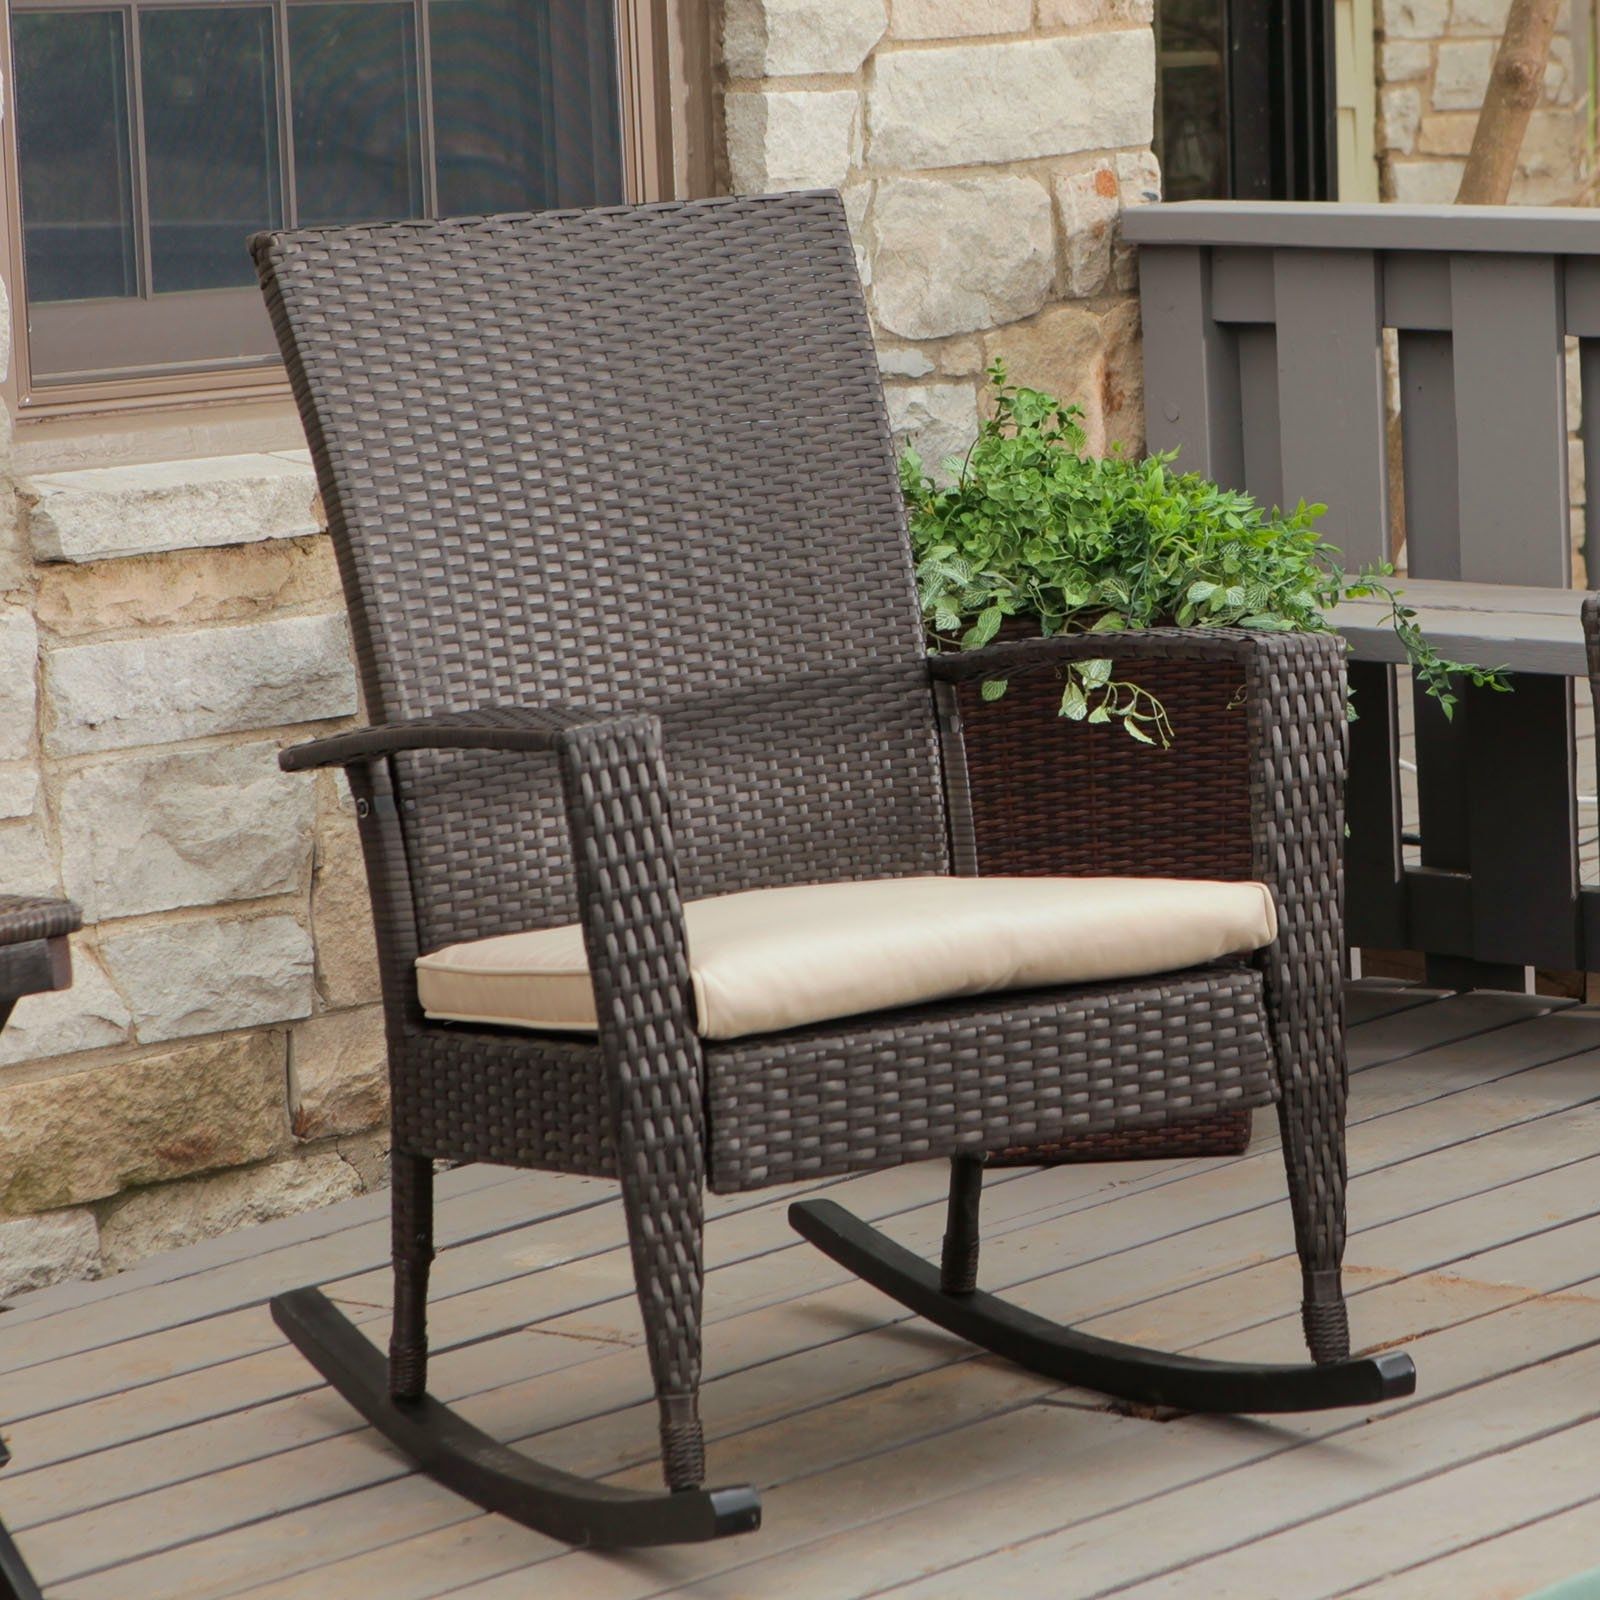 Outdoor: Wicker Rocking Chair In Brown With Stone Wall For Modern Regarding All Weather Patio Rocking Chairs (Photo 9 of 15)